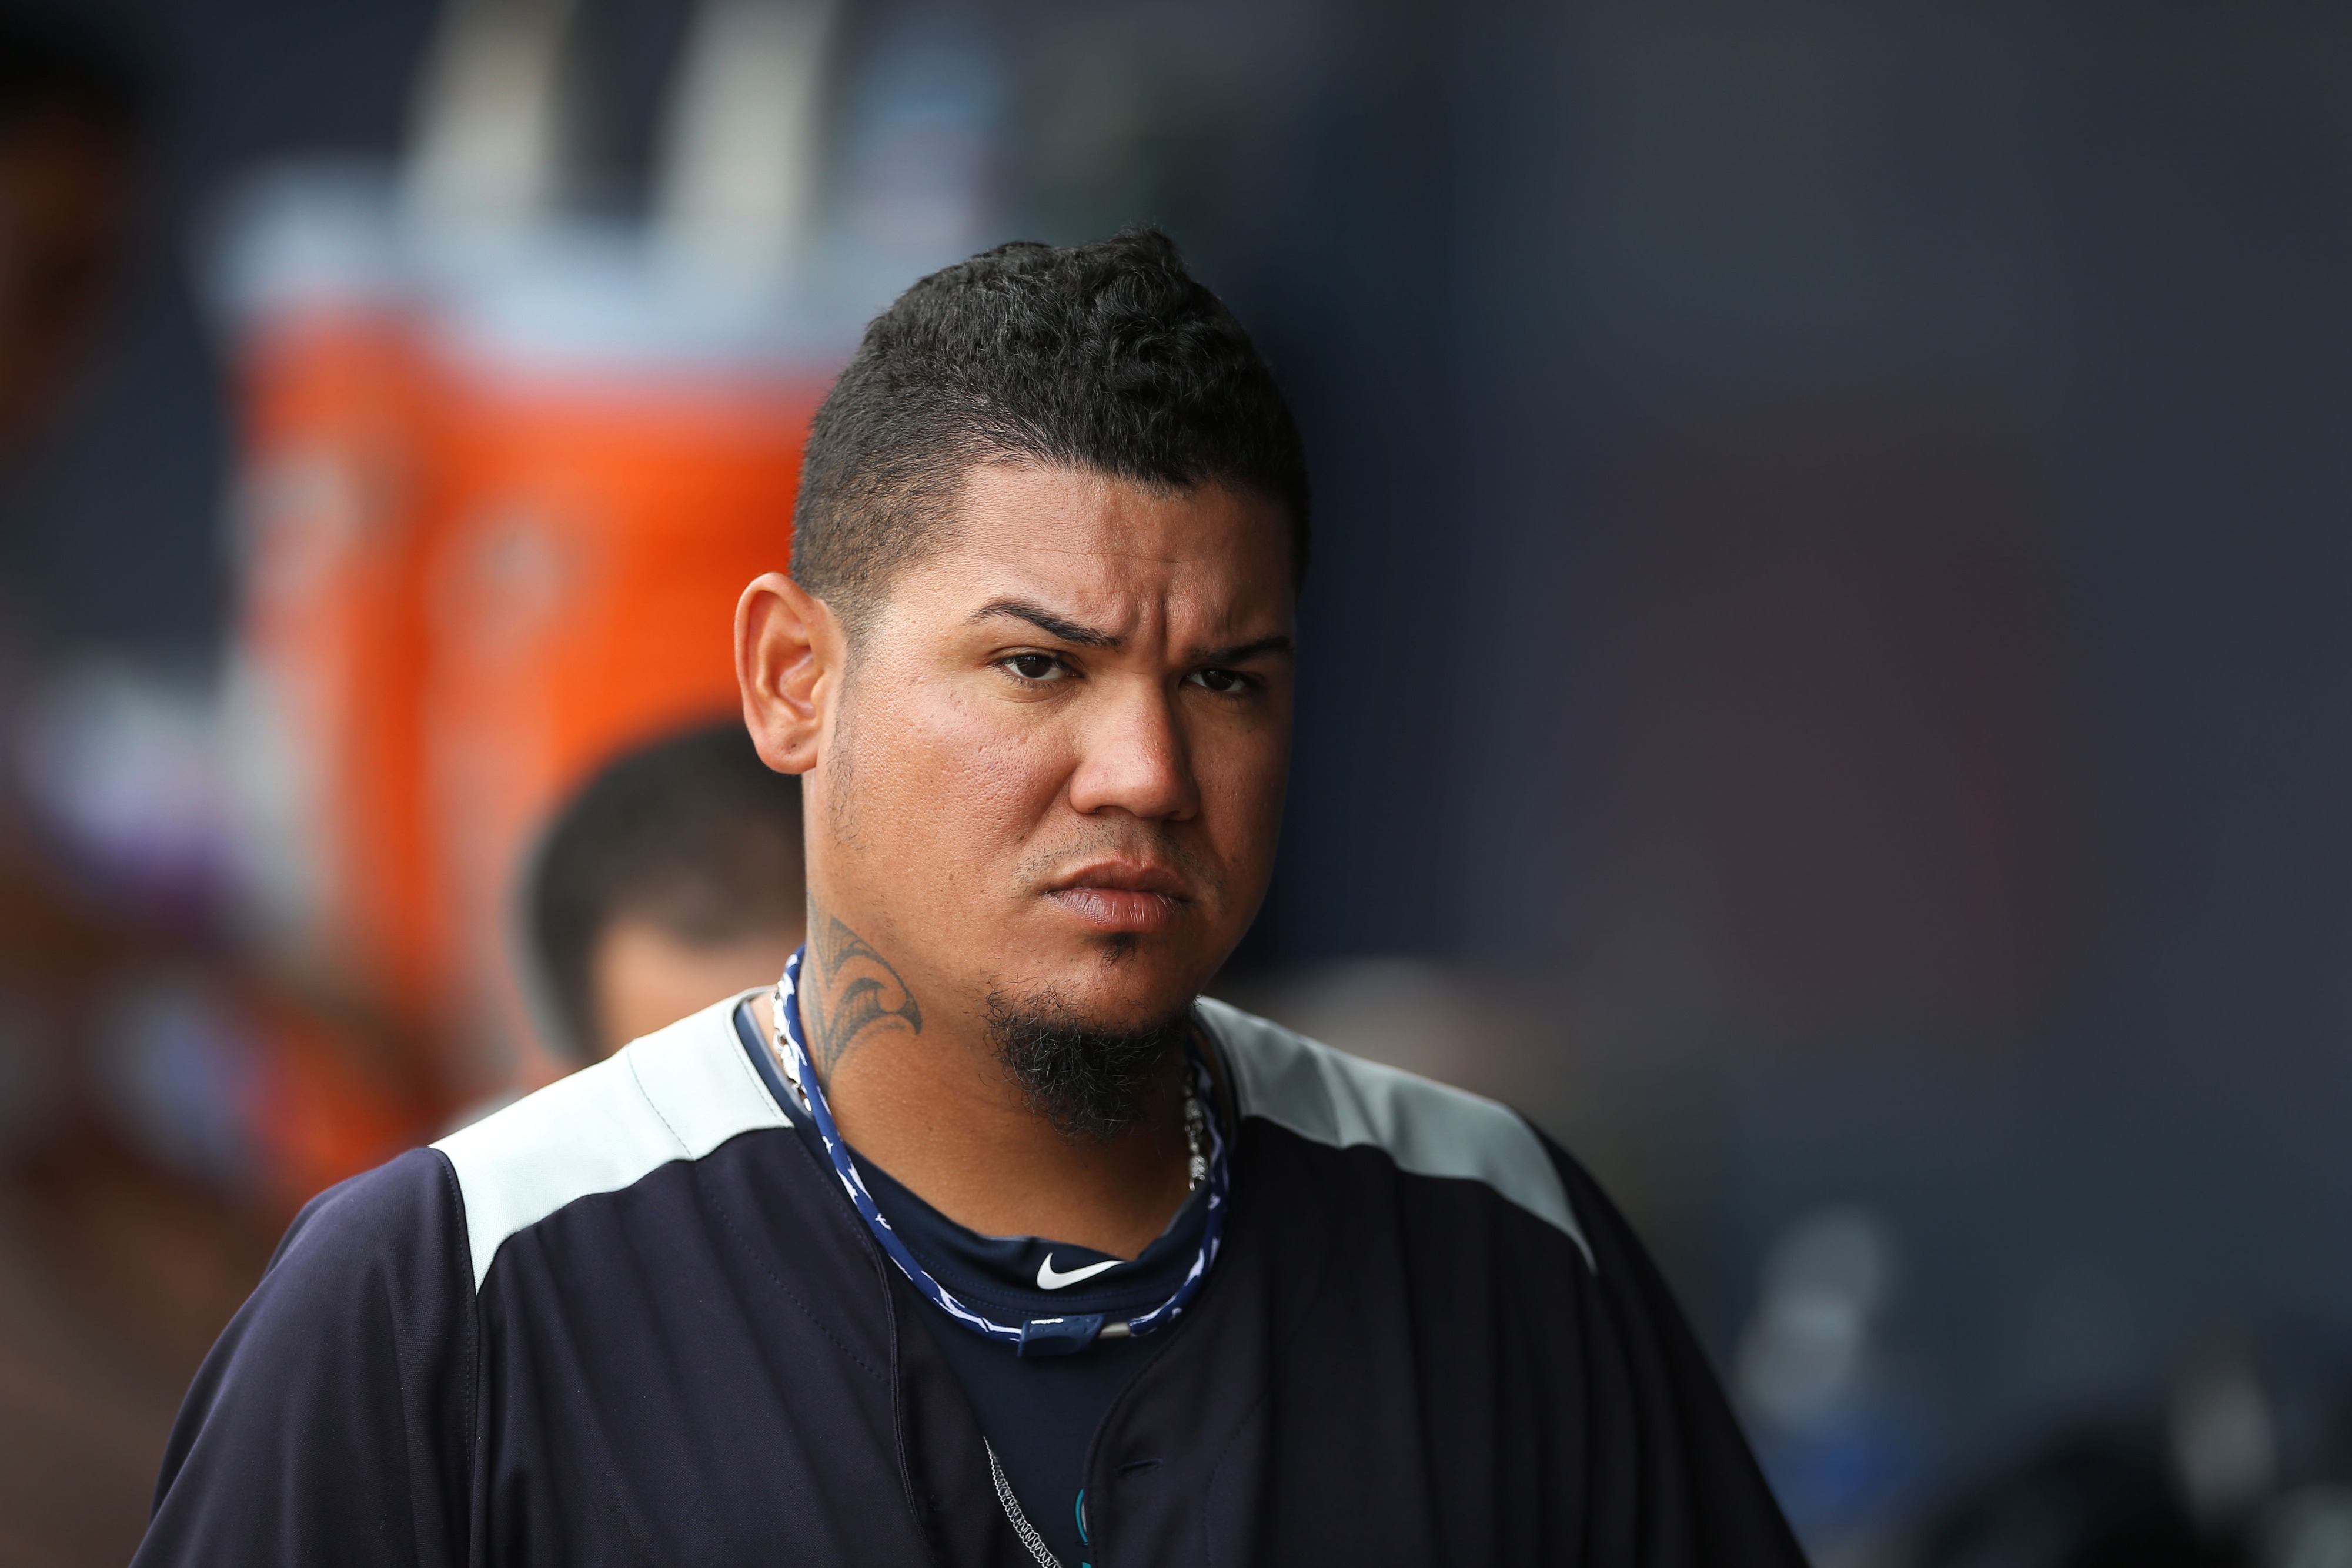 Each edition of this series will contain a Felix Hernandez photo.